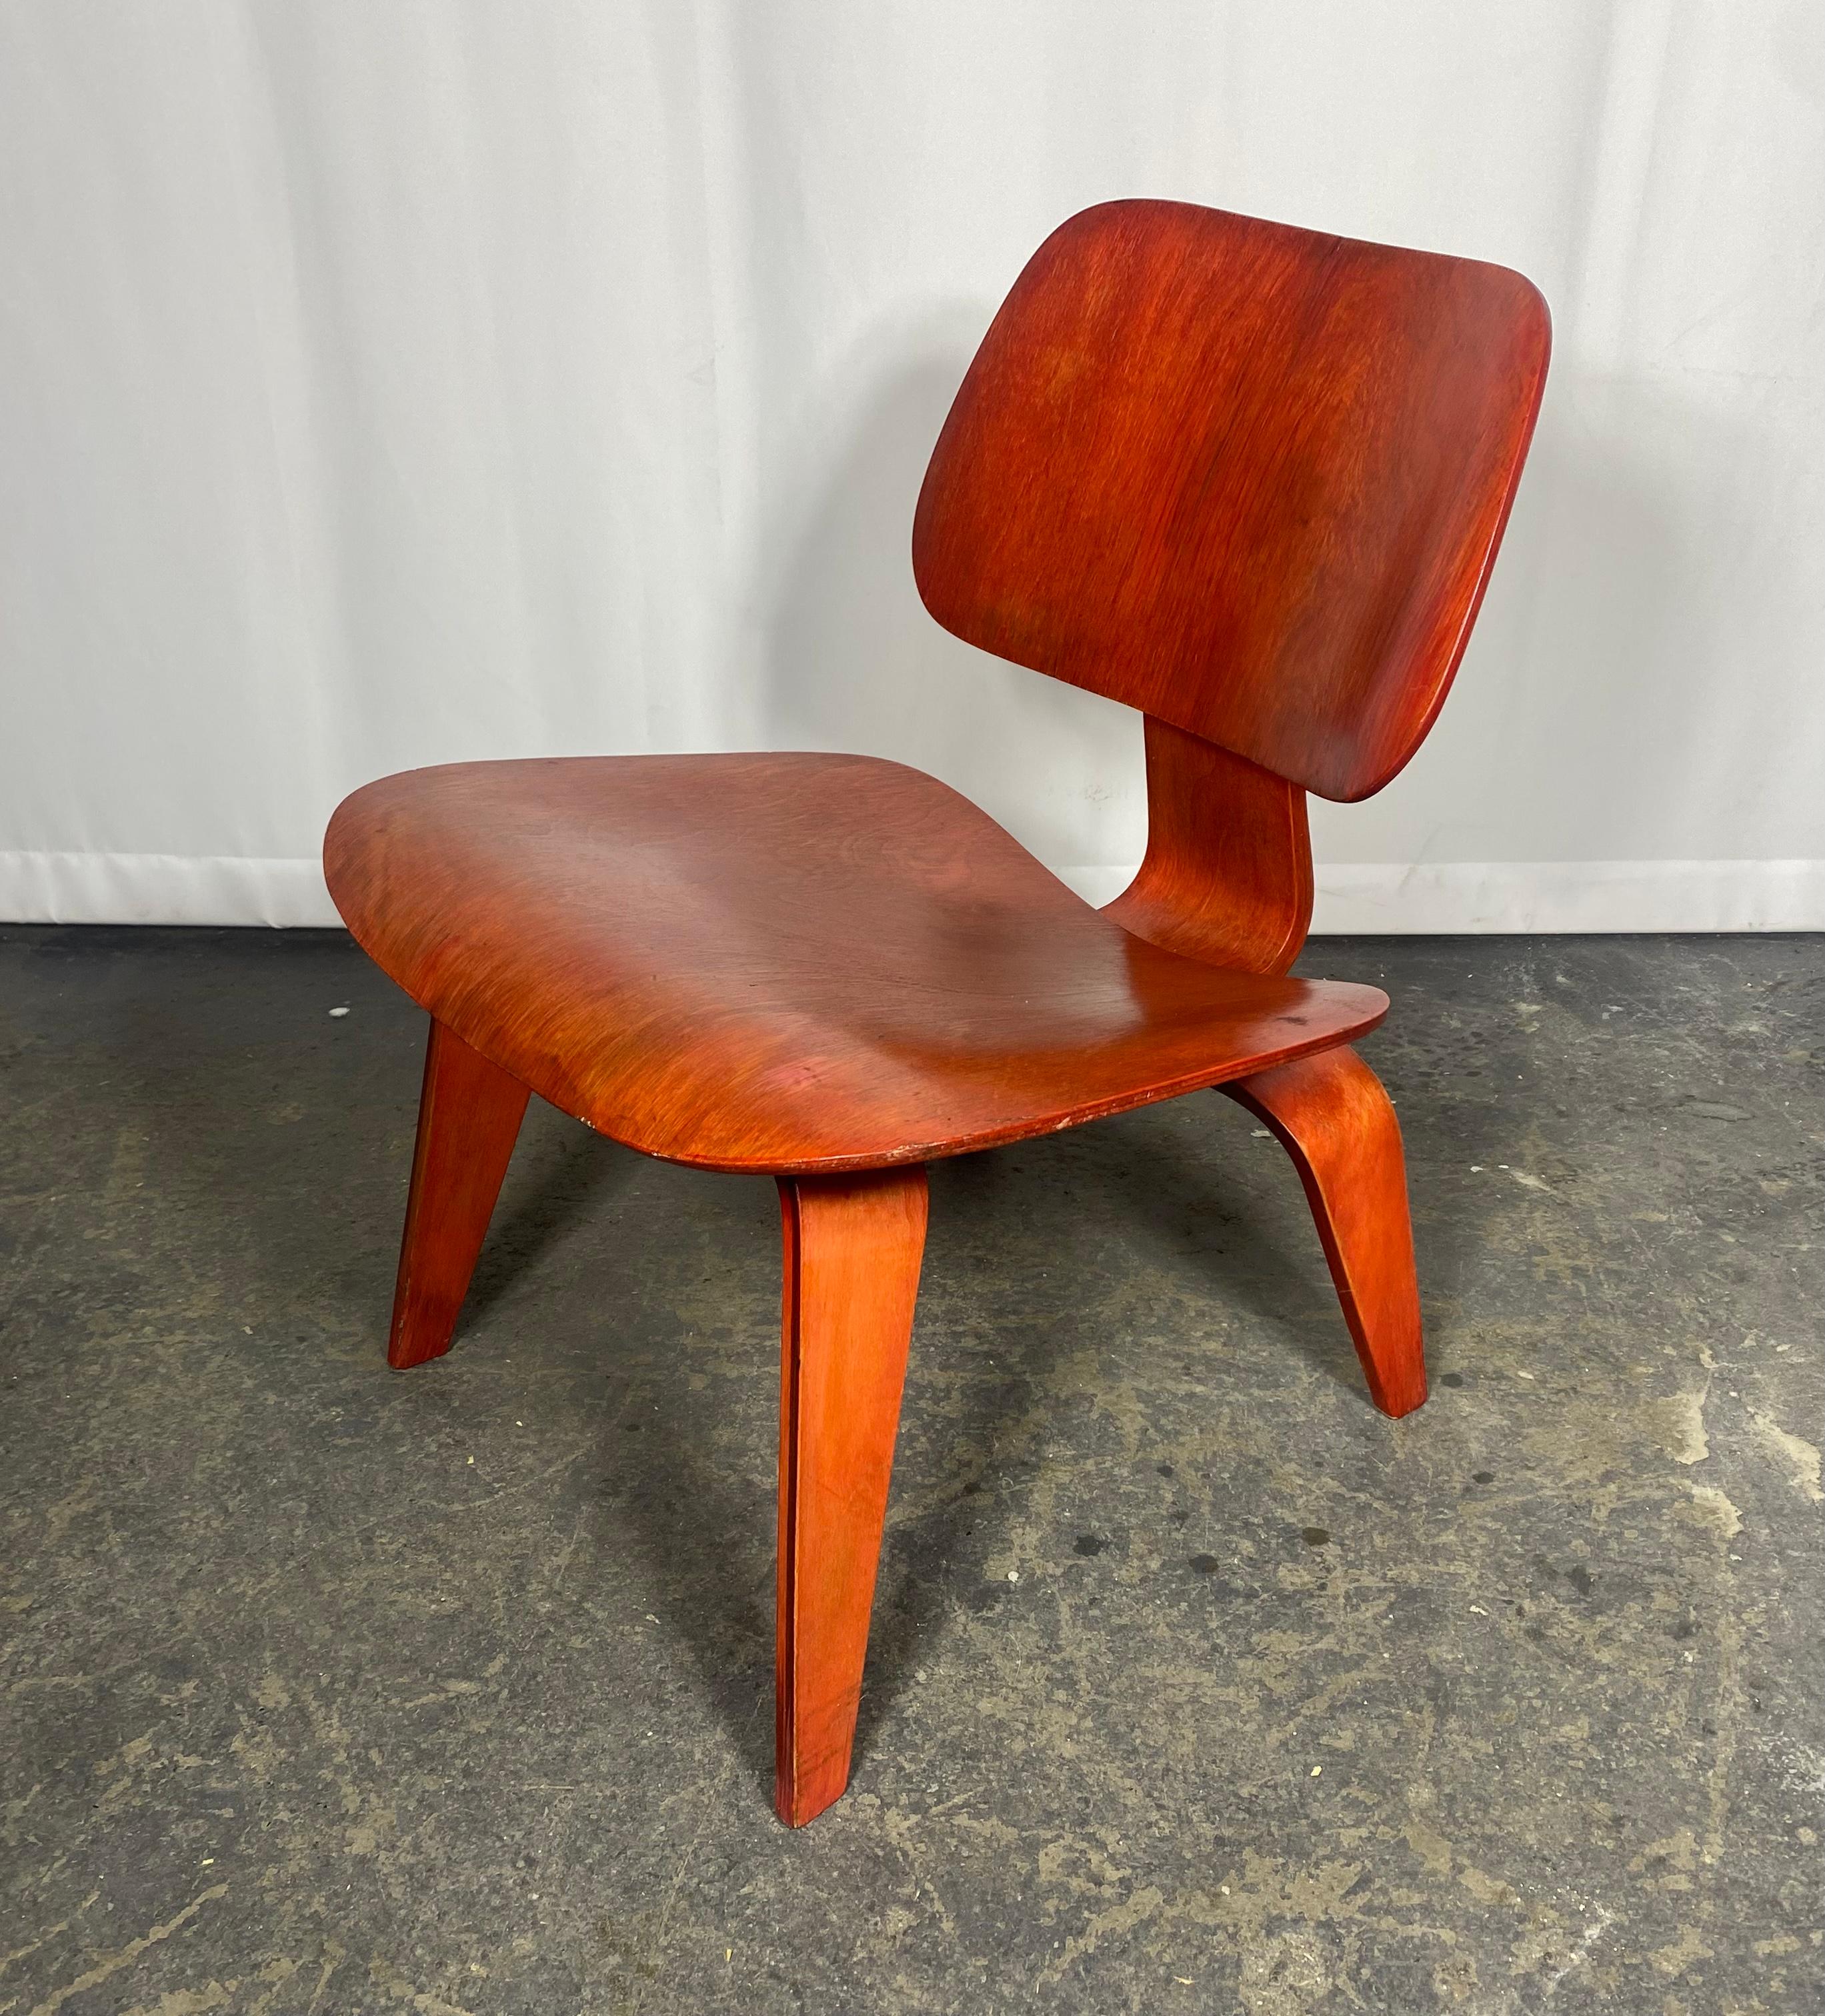 Milieu du XXe siècle Early LCW Lounge Chair stained red by Charles and Ray Eames, Evans Plywood, 1950s en vente